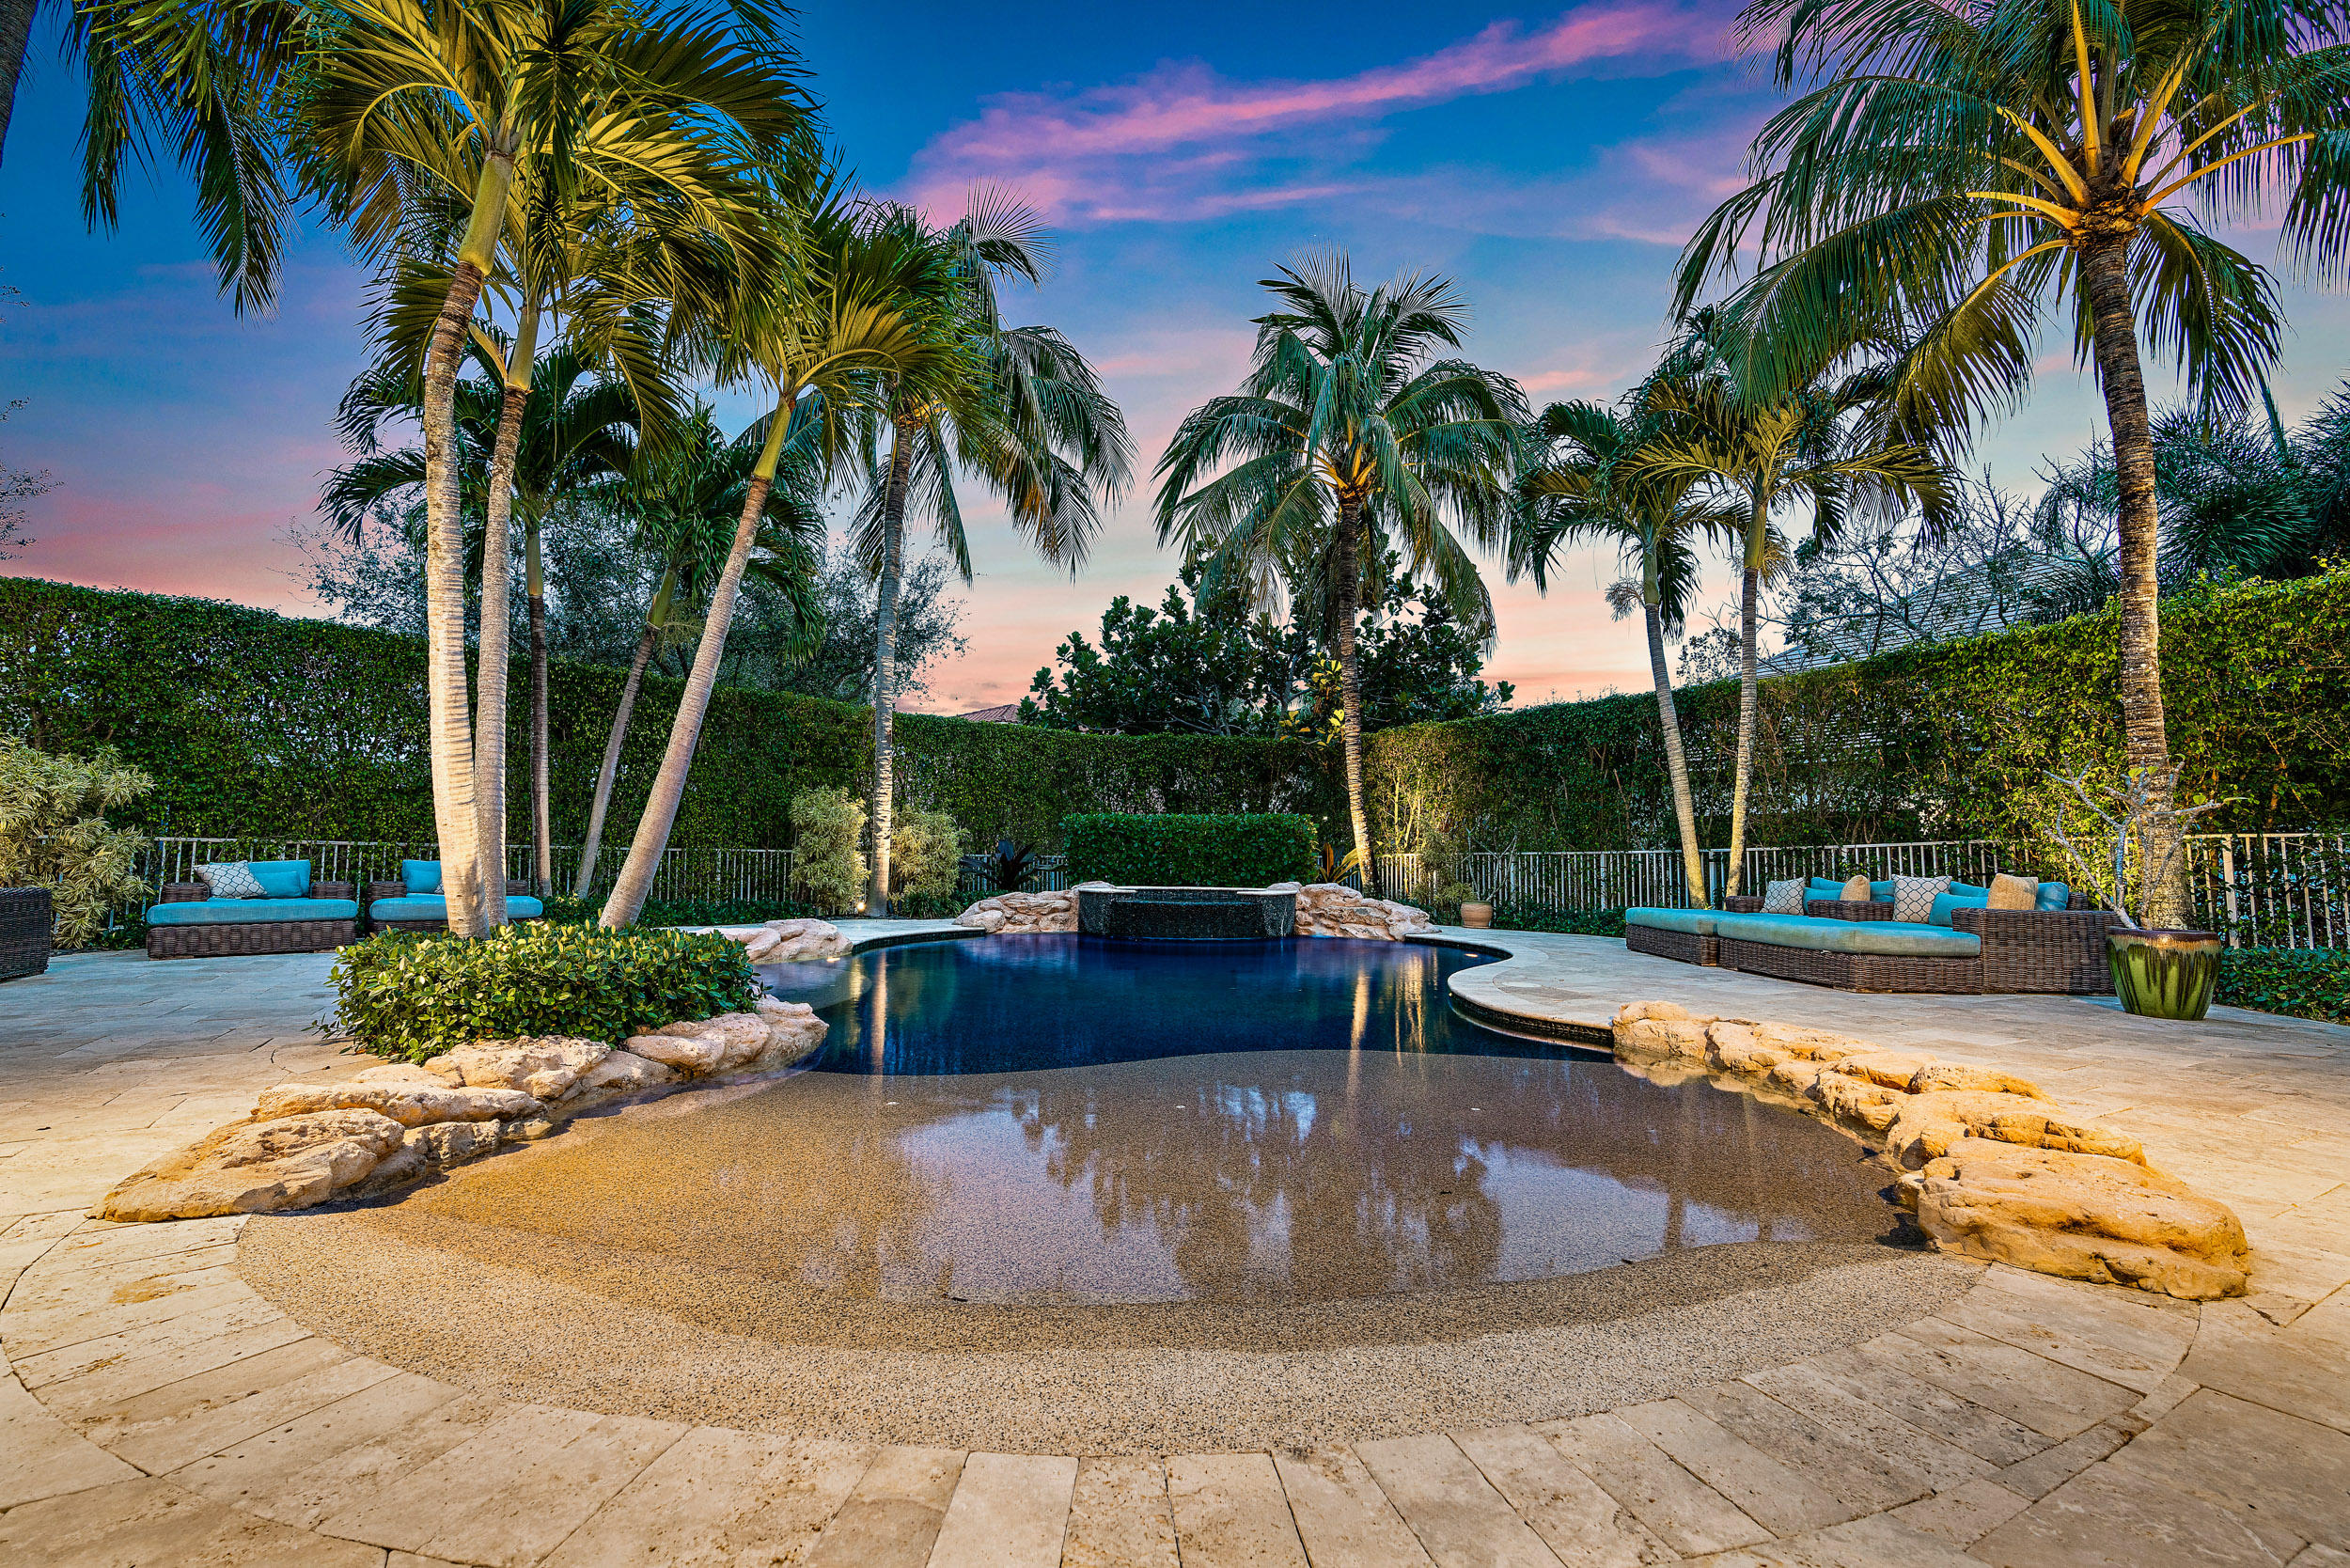 a view of a backyard patio with palm trees